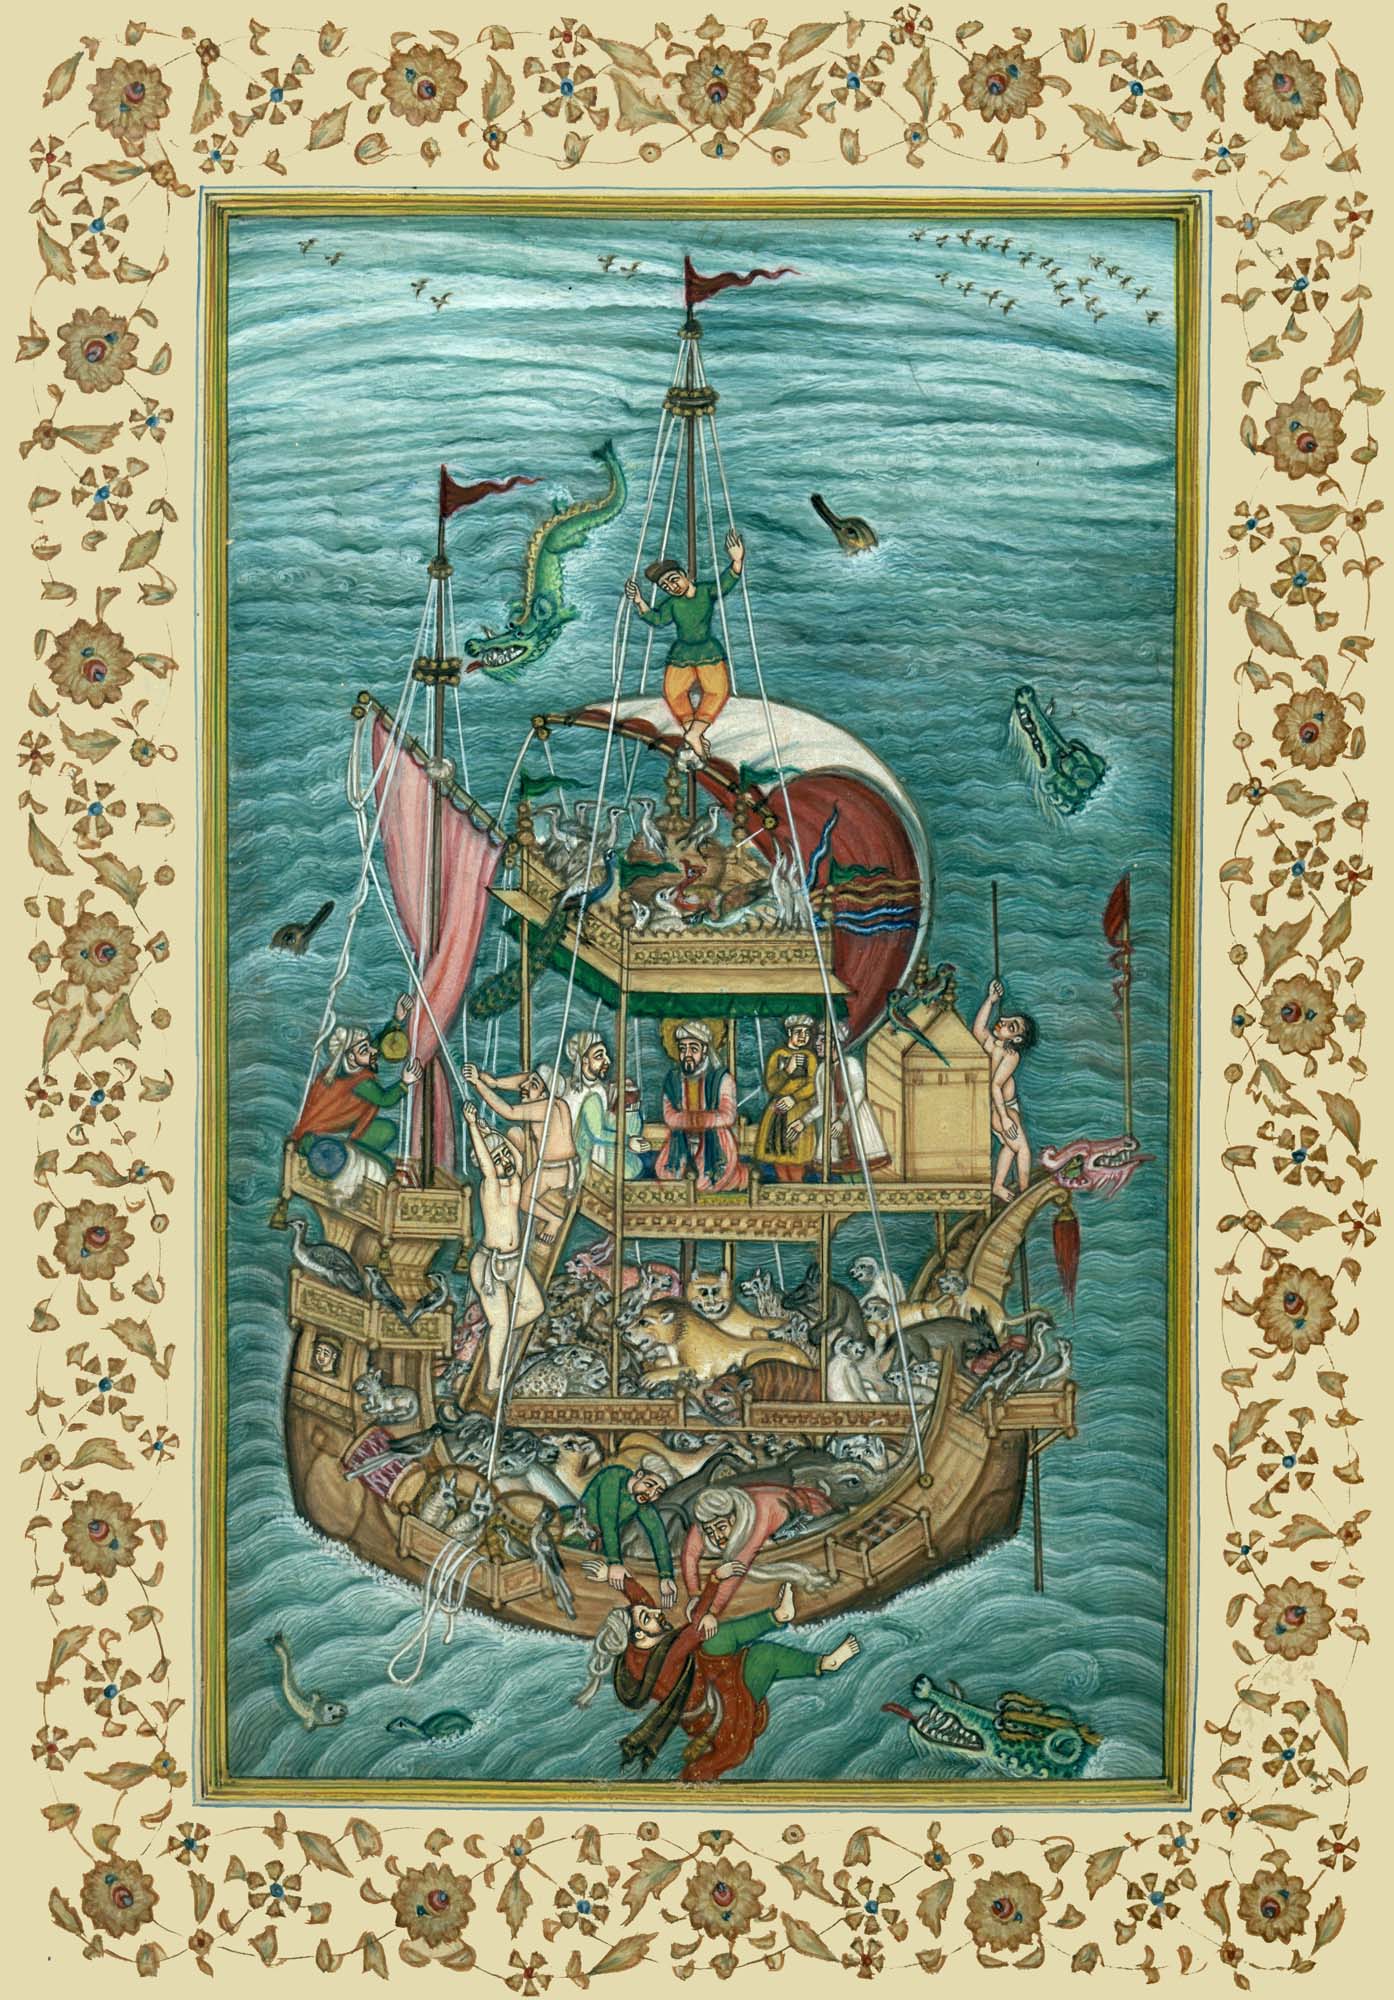 Noah's Ark, from the Akbarnama, attributed to Miskin | Exotic India Art